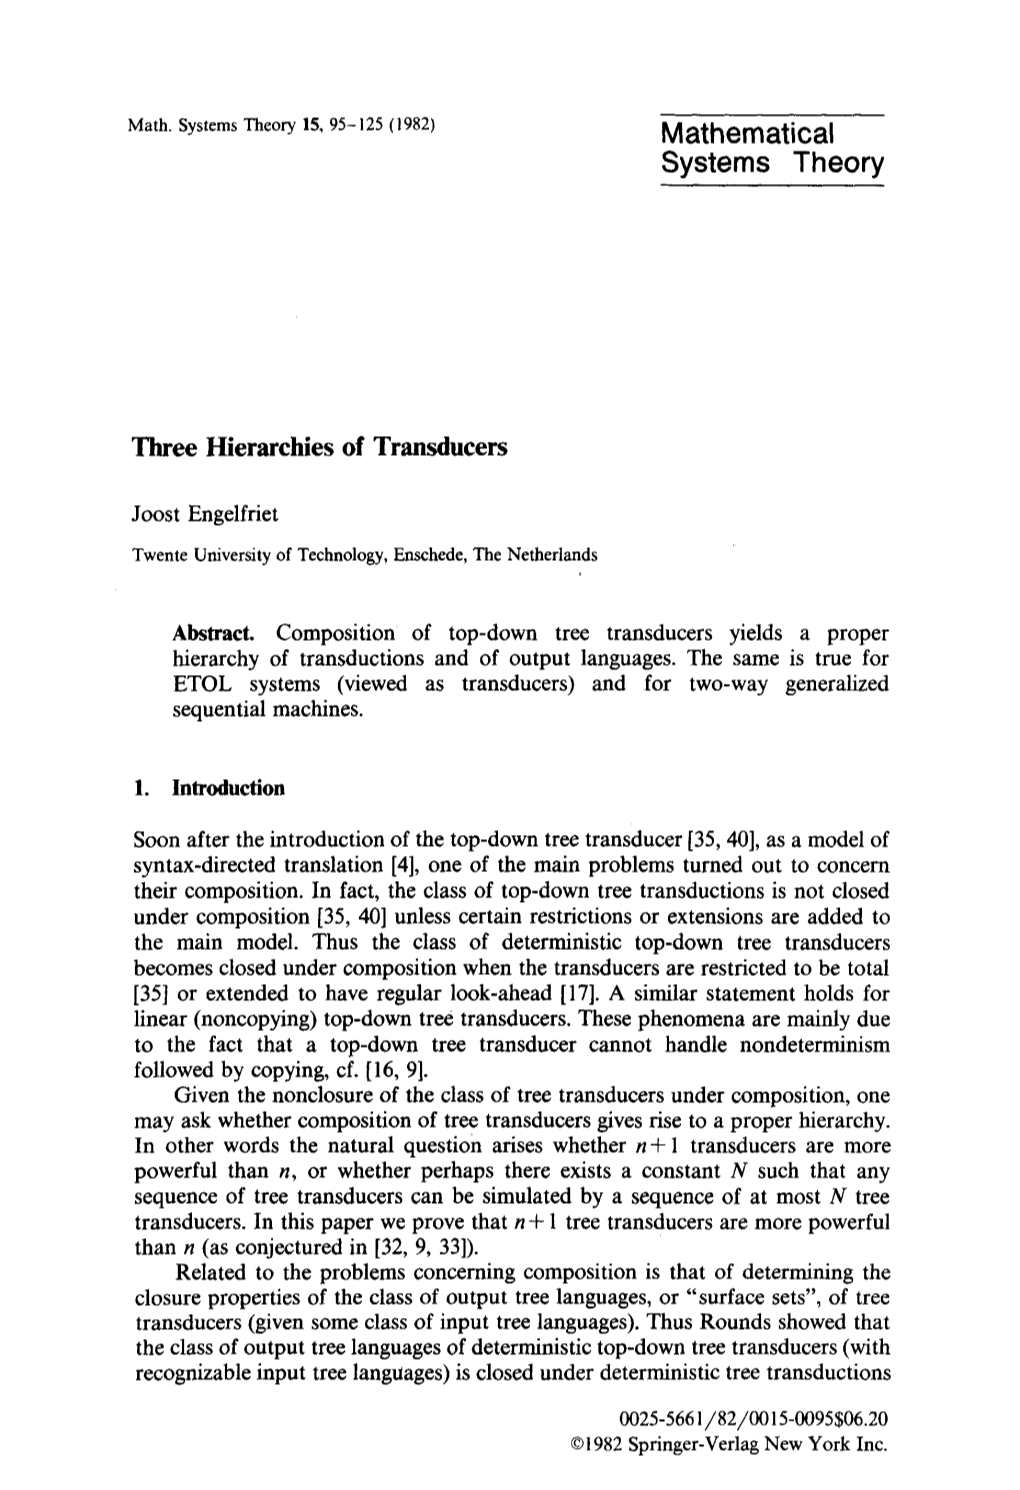 Three Hierarchies of Transducers